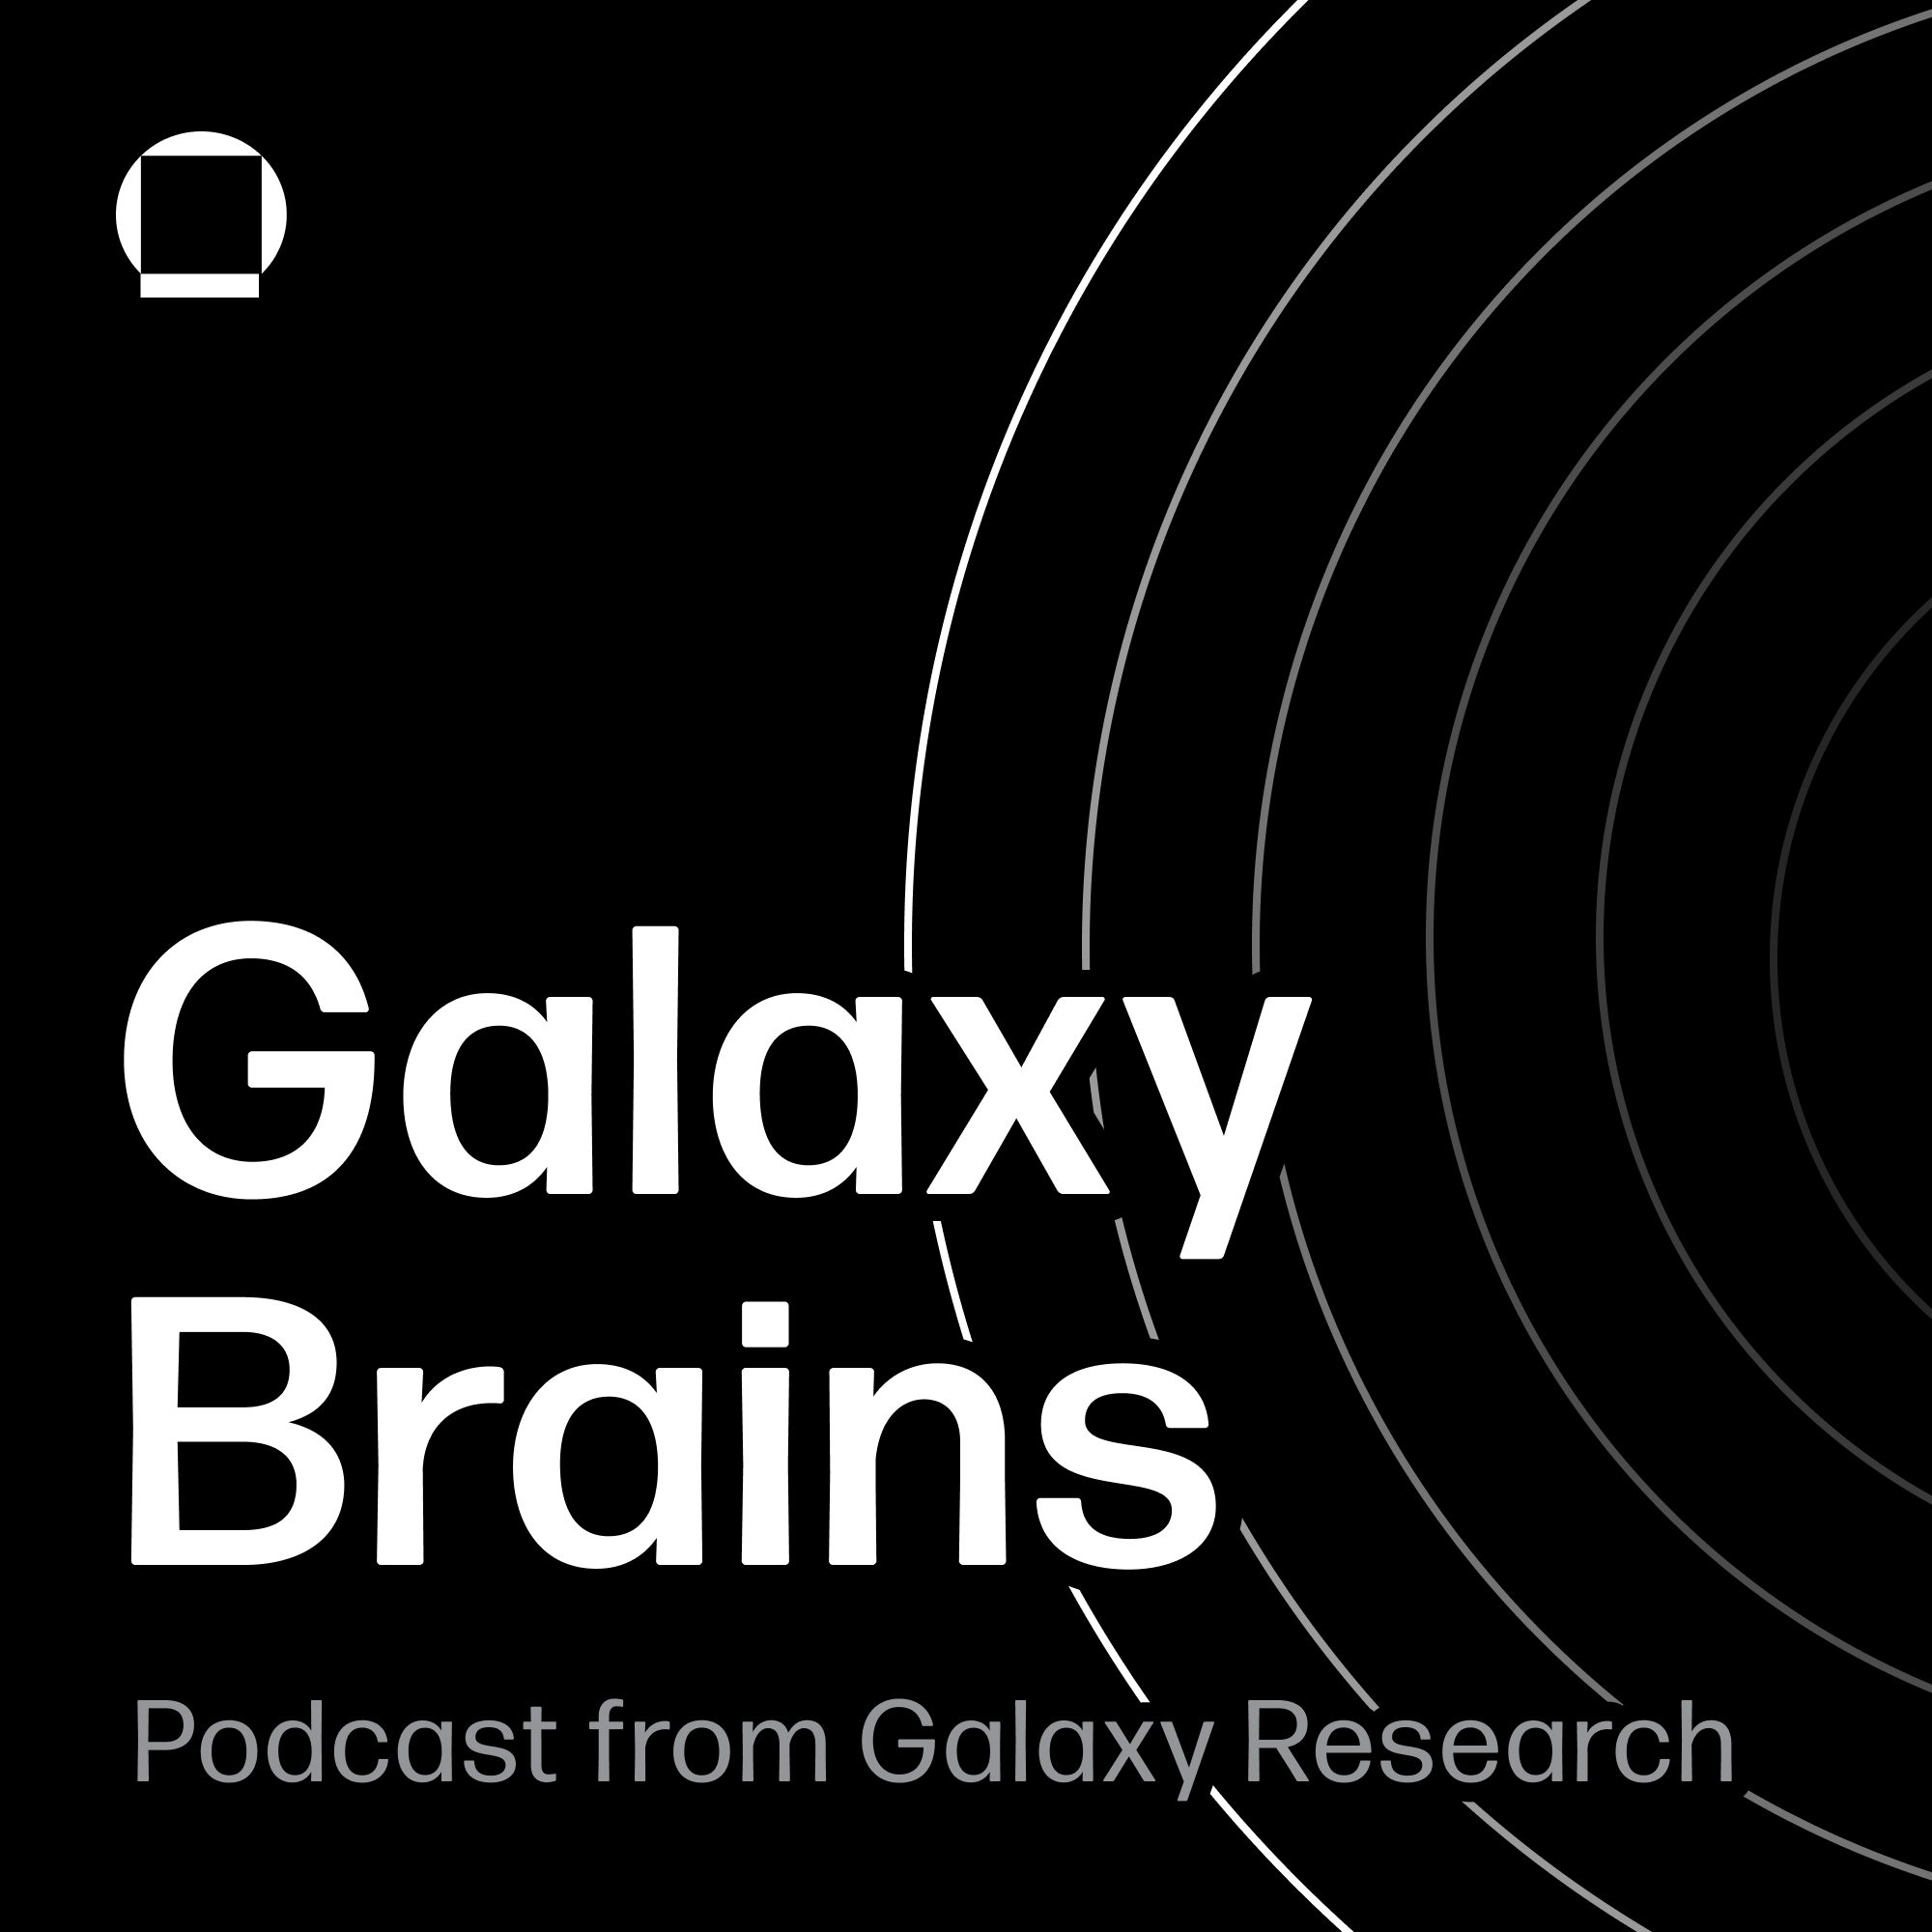 Tim Grant (Galaxy) on Europe and Beyond